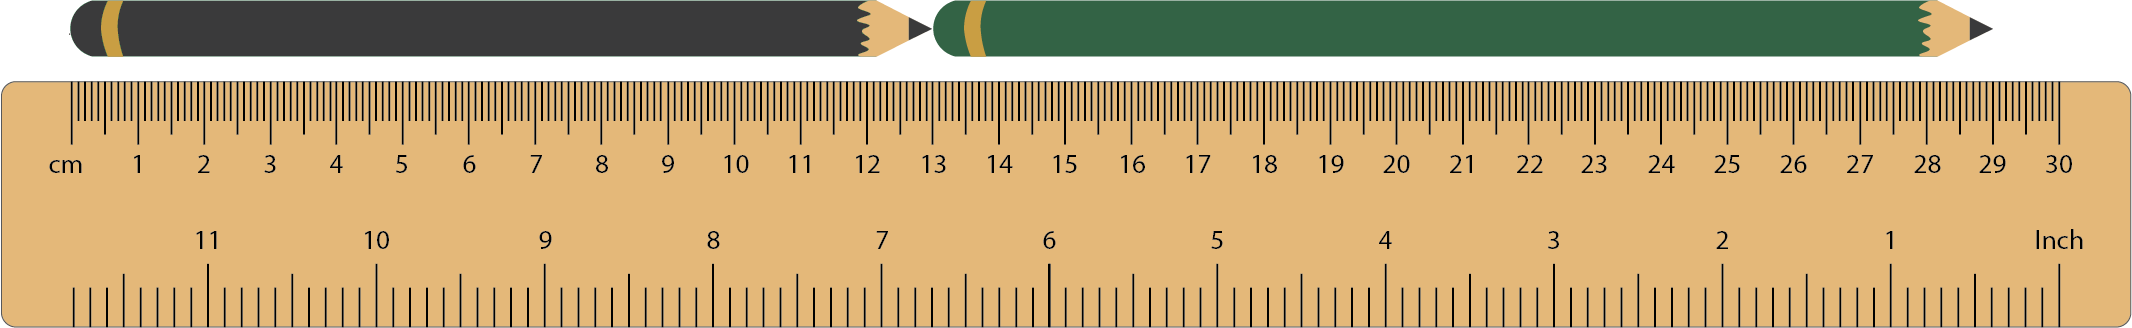 Image of two pencils aligned end-on-end against a ruler.